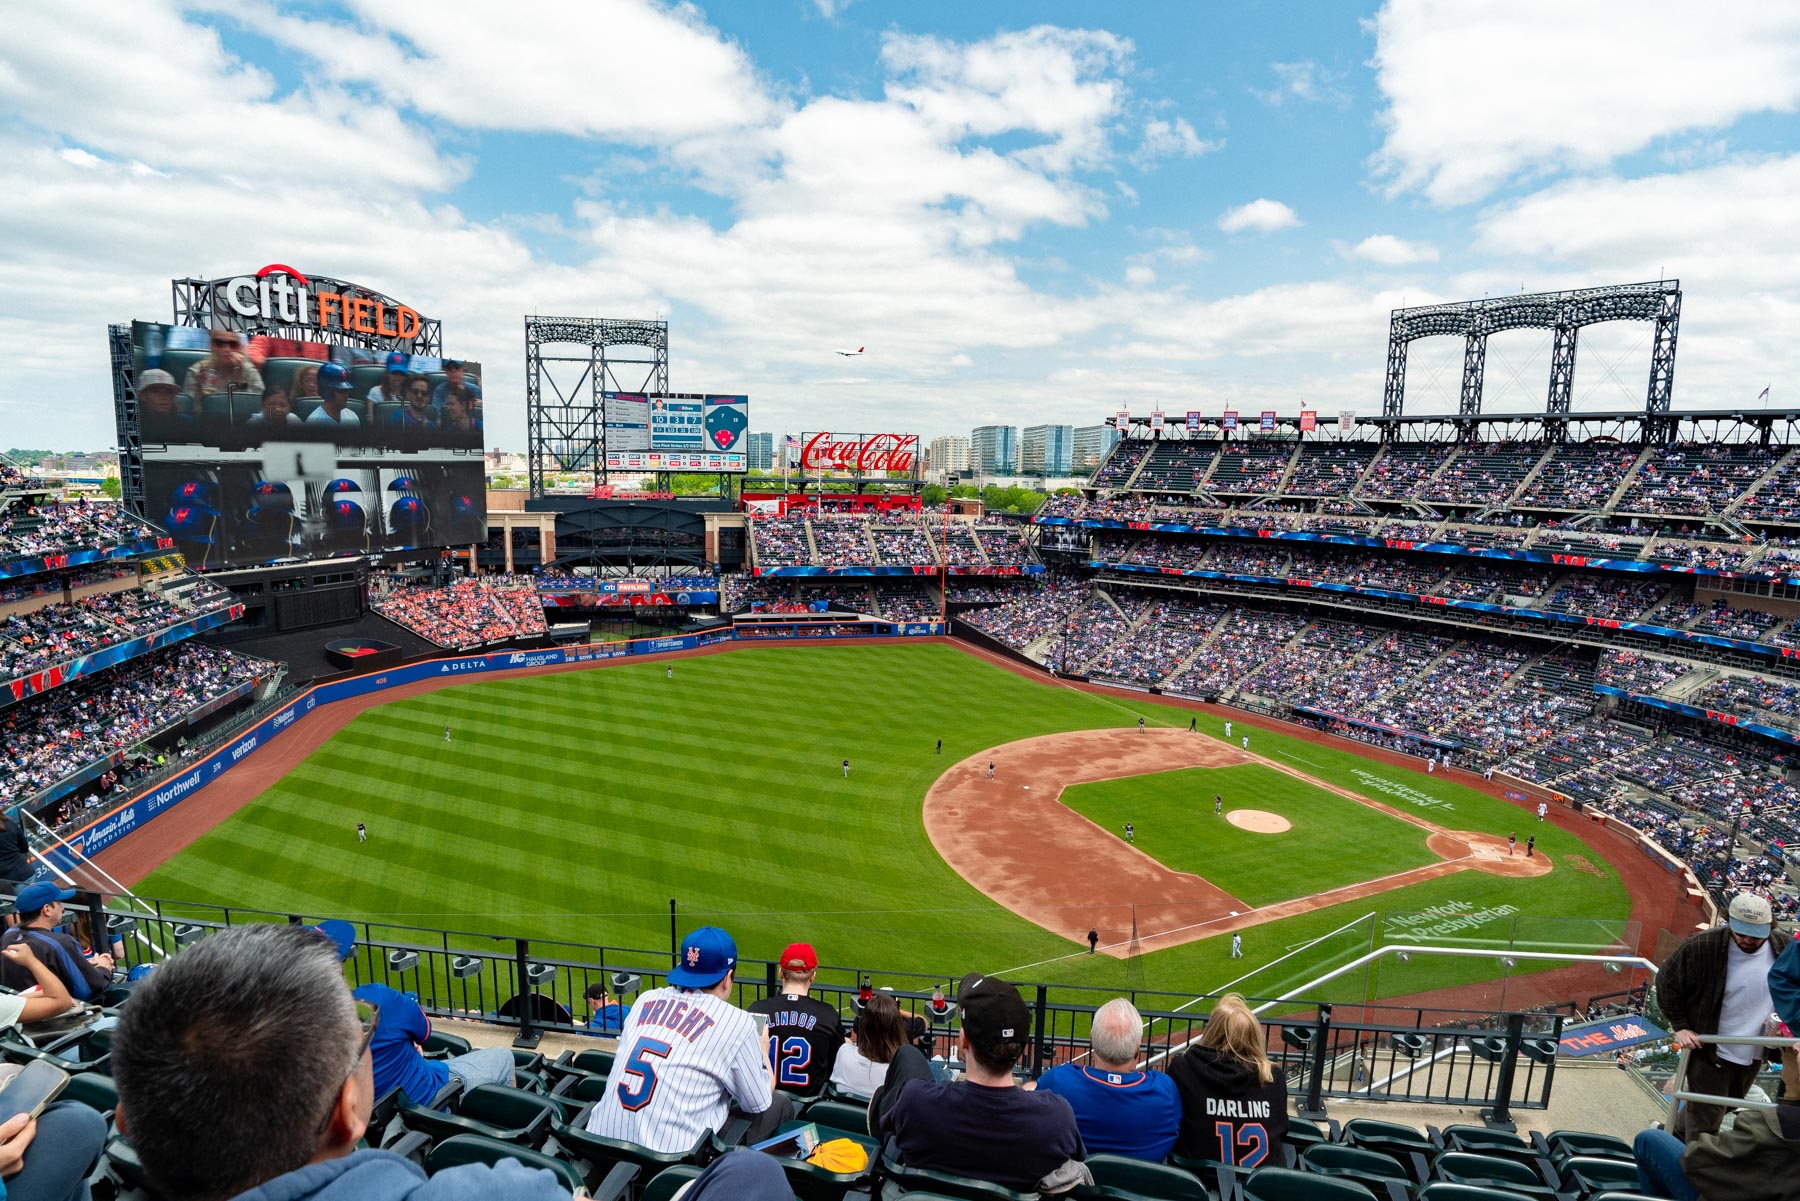 The Mets Stadium NYC, what to do in Queens New York